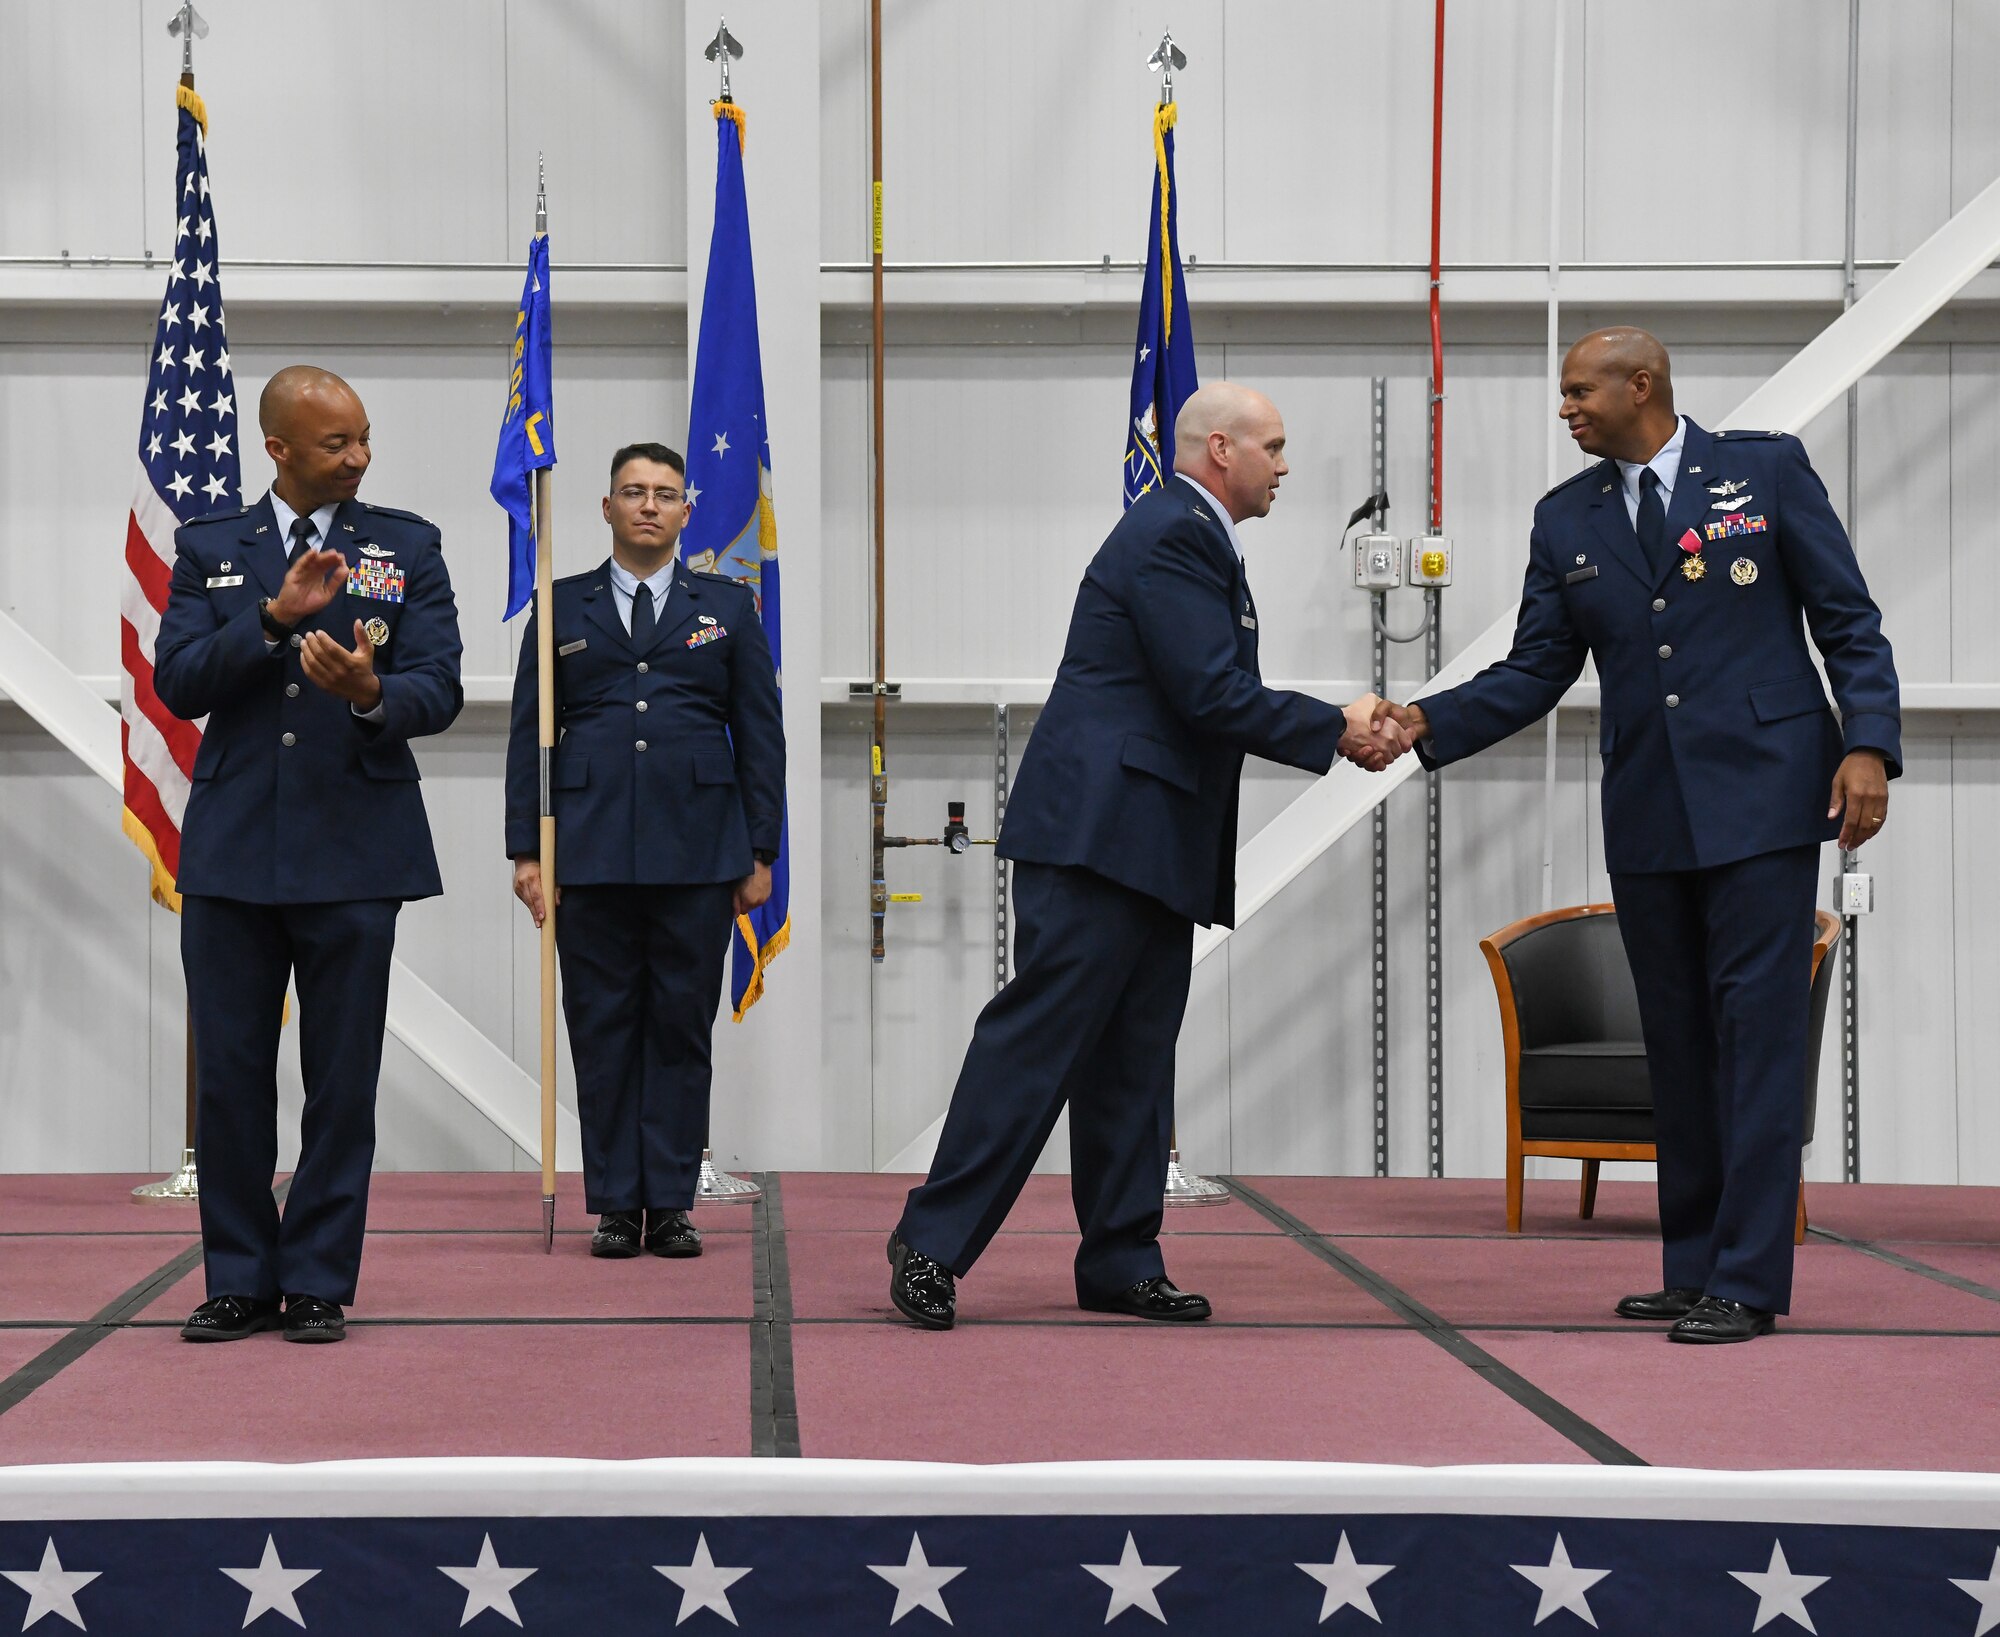 Col. Jason Vap, center, commander of the 804th Test Group, Arnold Engineering Development Complex, shakes hands with Col. Linc Bonner, the previous 804 TG commander, during a change of command ceremony June 21, 2022, in the Aircraft Test Support Facility at Arnold Air Force Base, Tennessee. Also pictured are Col. Randel Gordon, left, AEDC commander, and Capt. Christopher Fernandez, guidon bearer. (U.S. Air Force photo by Jill Pickett)